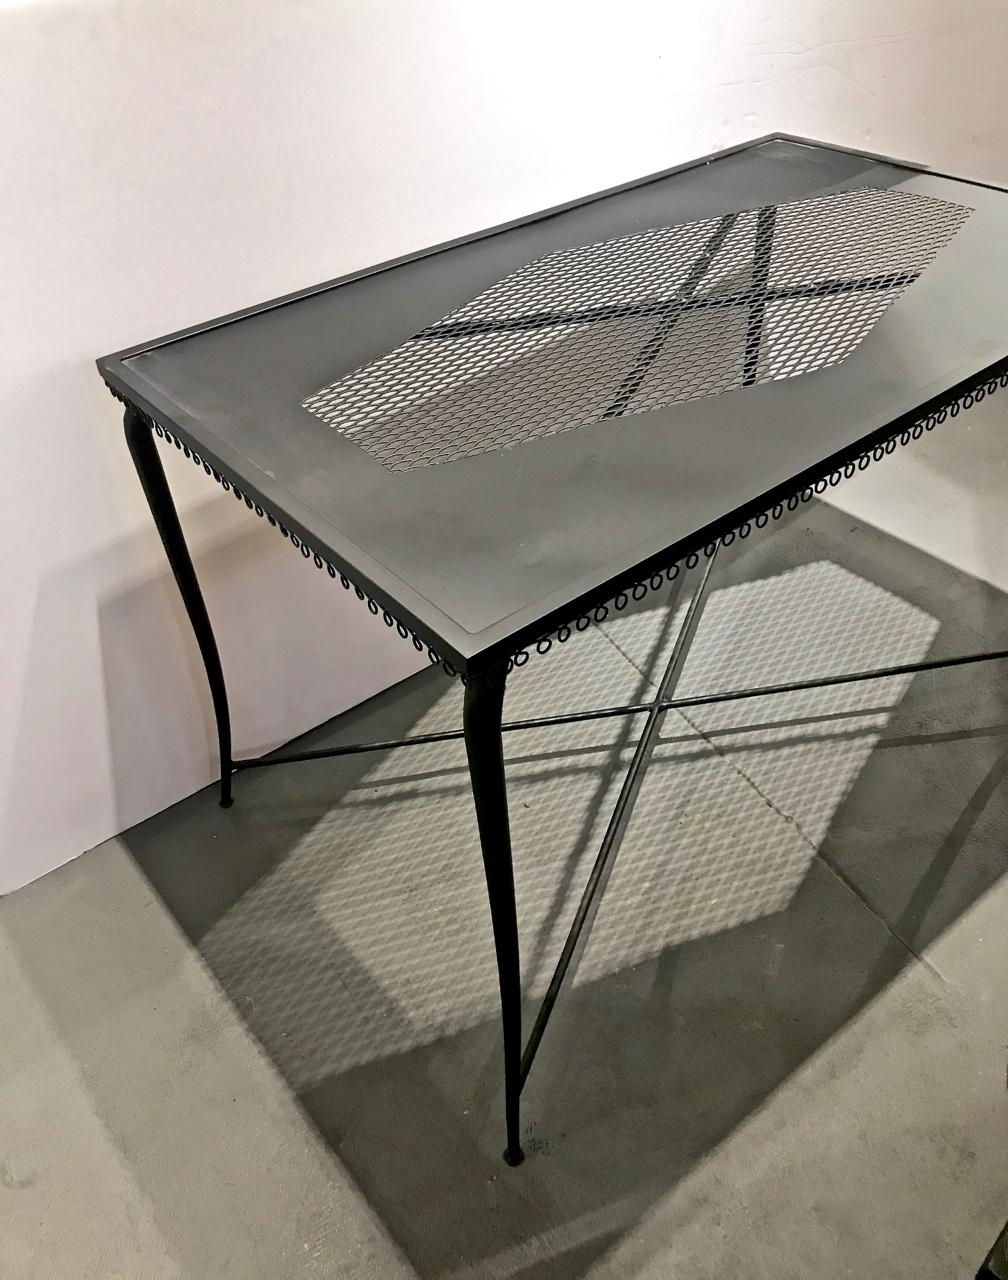 French Perforated Iron Table, Attributed to Mathieu Mategot  In Good Condition For Sale In Pasadena, CA